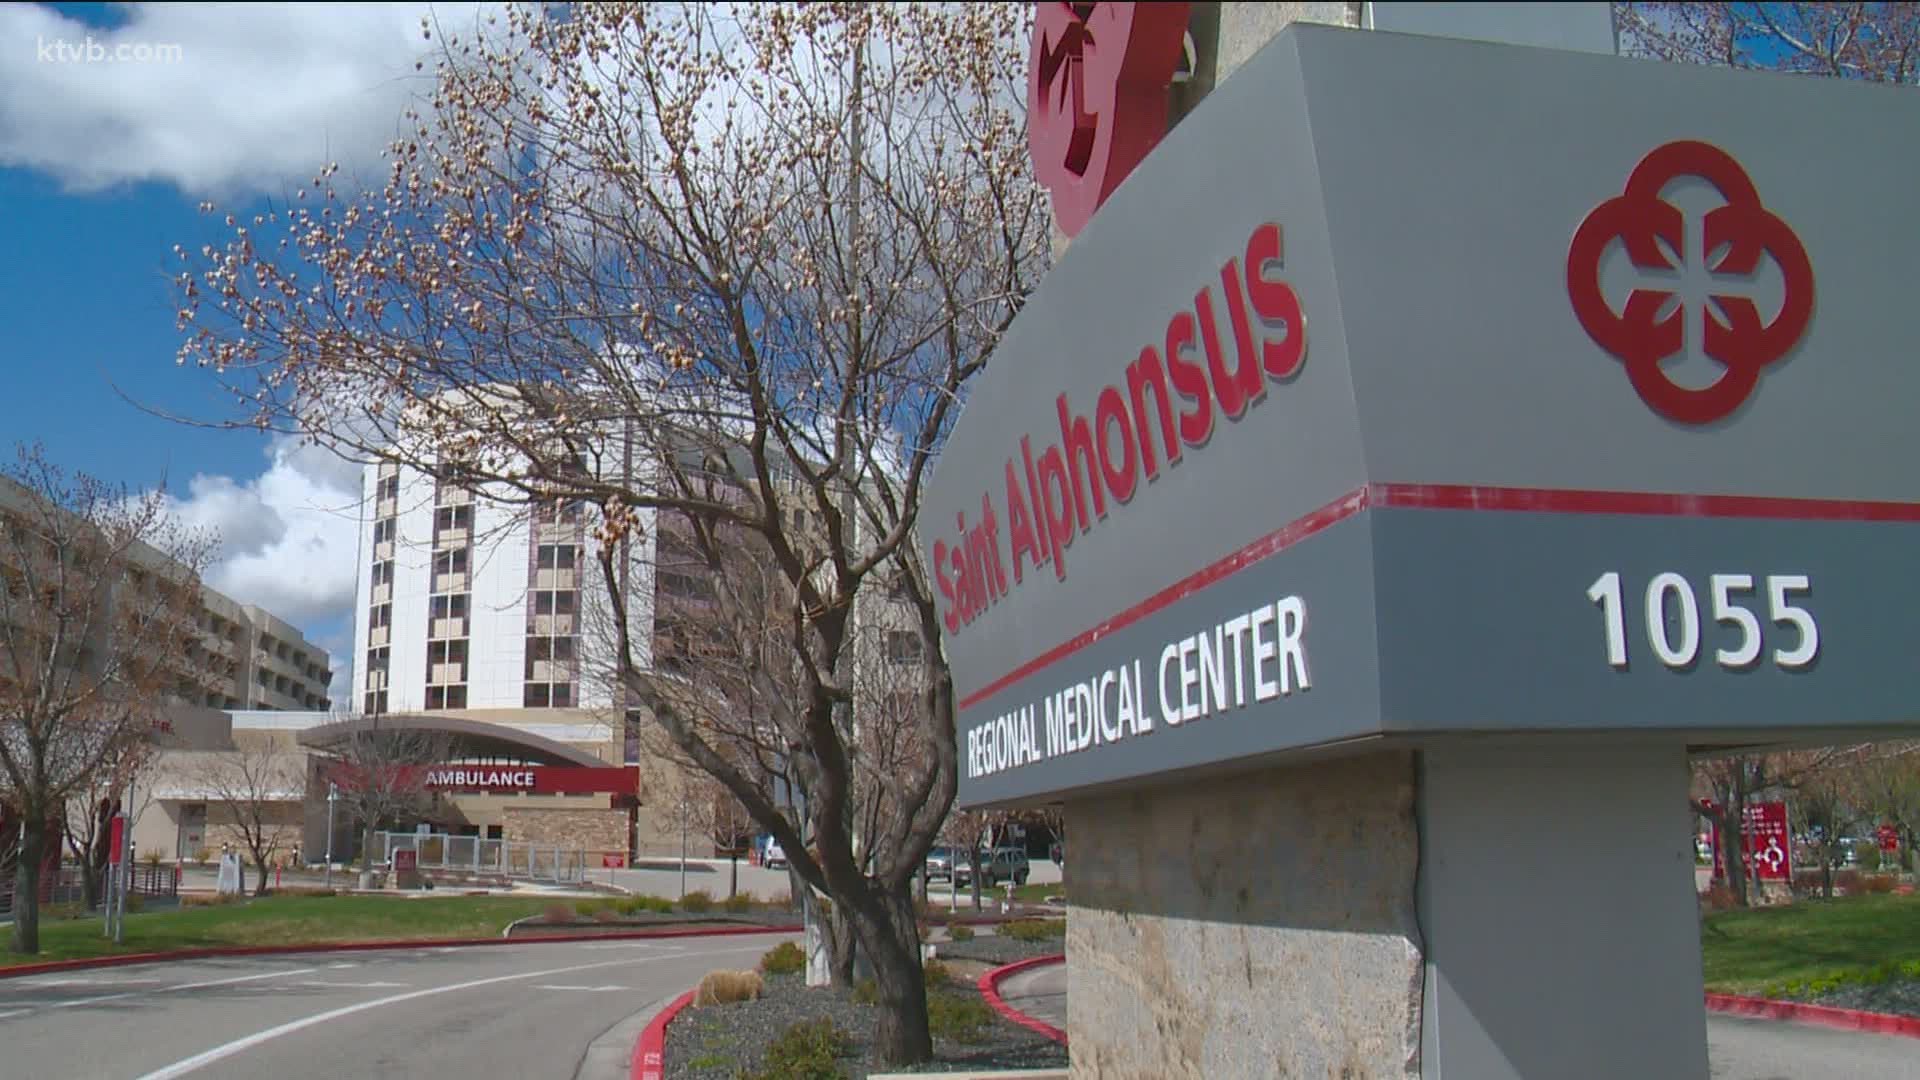 Hospital administrators say they are taking steps to prepare for more COVID-19 patients.